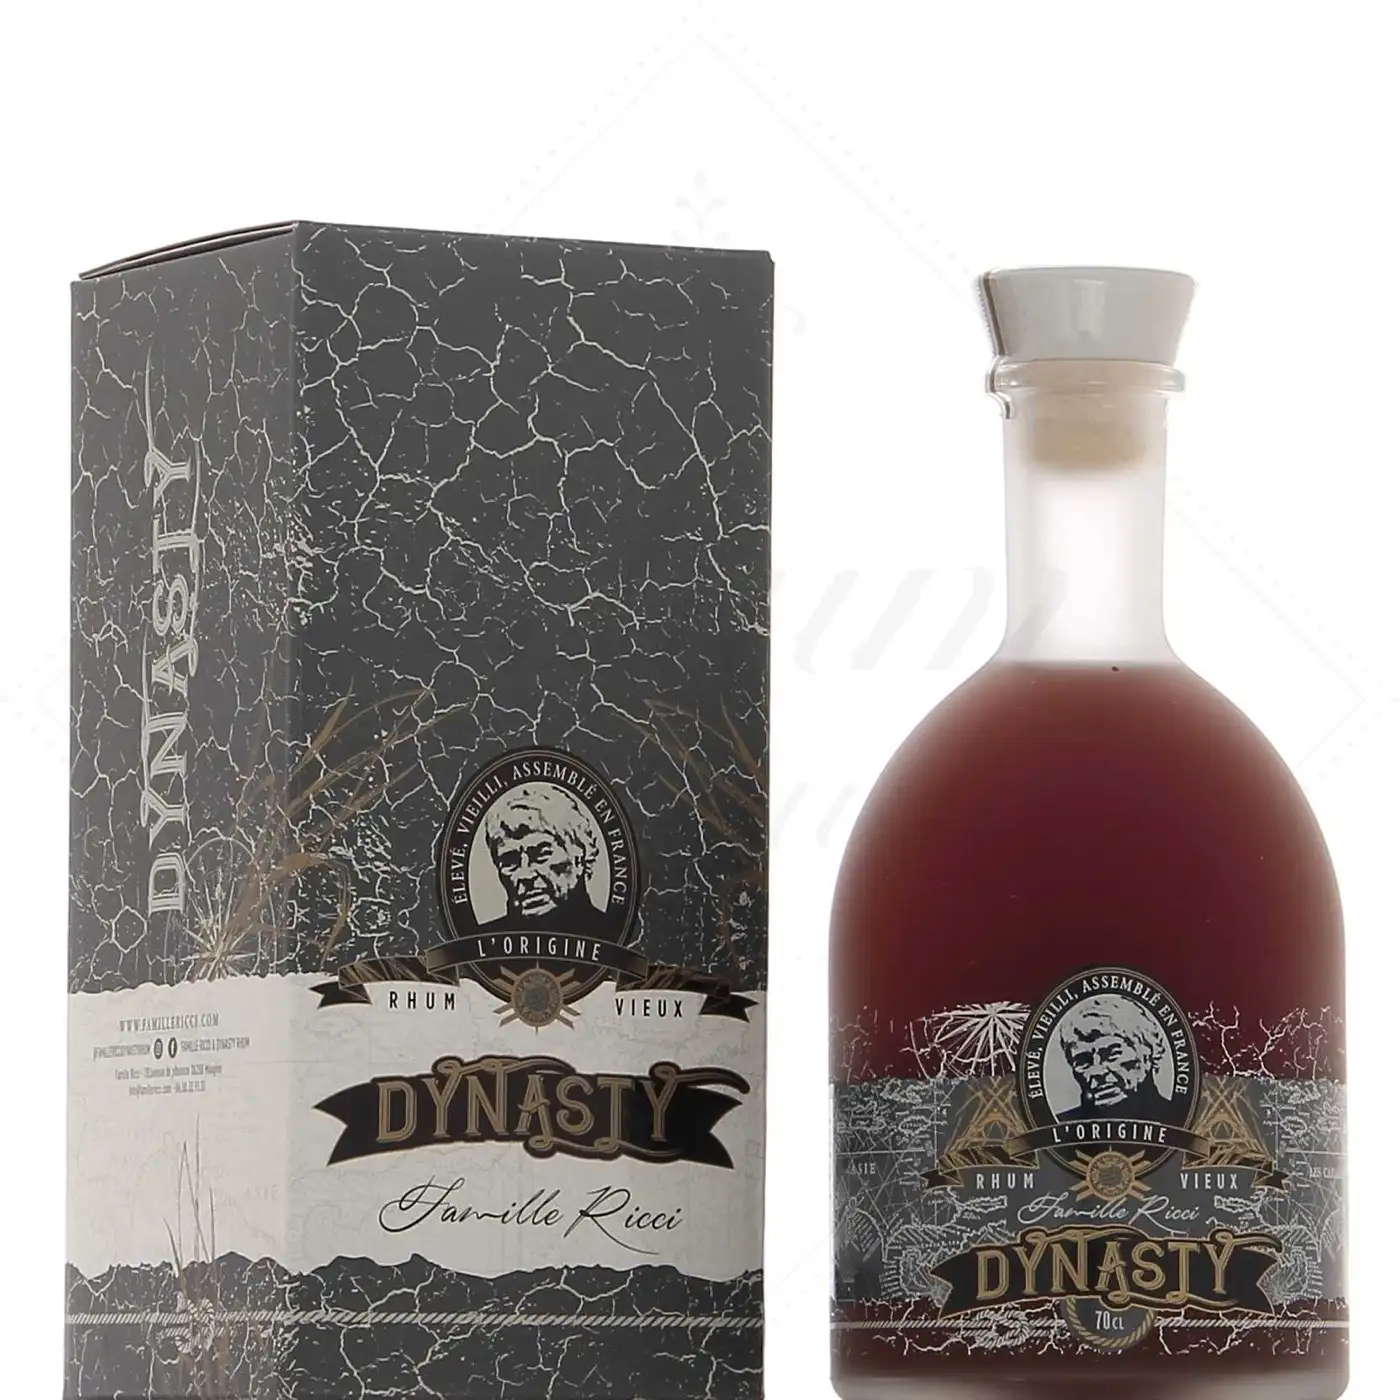 Image of the front of the bottle of the rum Dynasty L'Origine